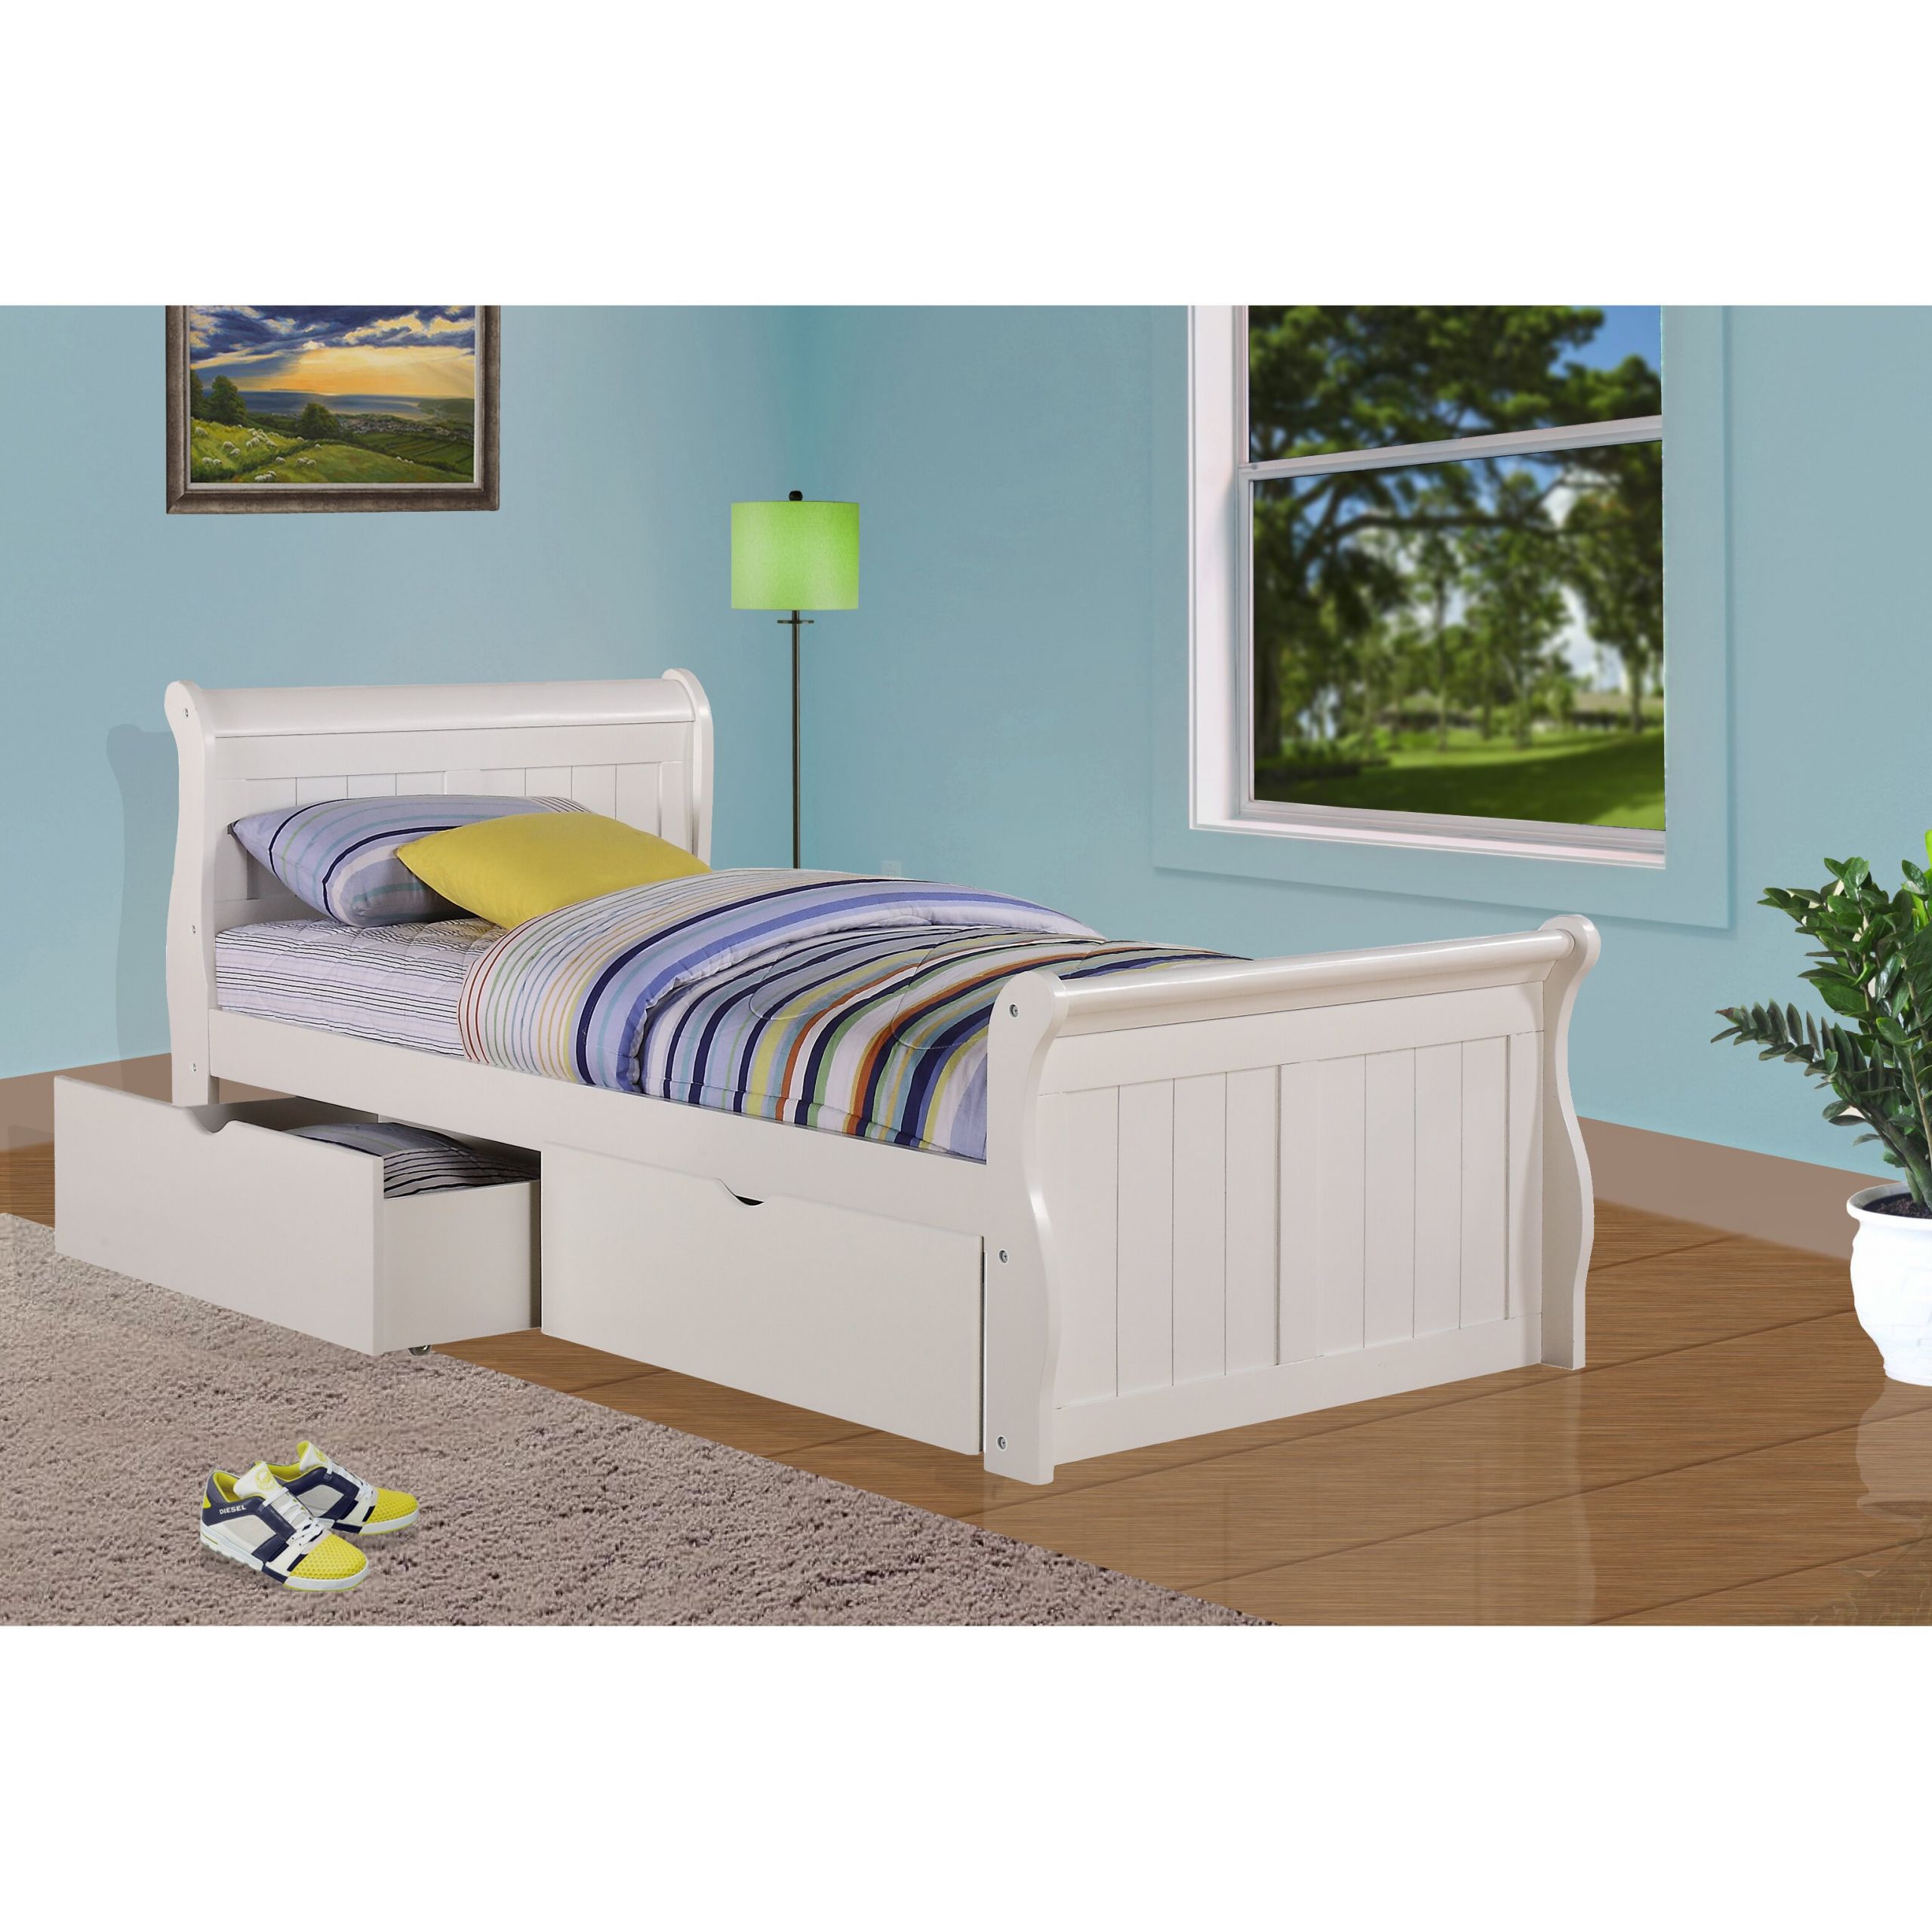 Kids Storage Beds
 Donco Kids Sleigh Bed with Storage & Reviews